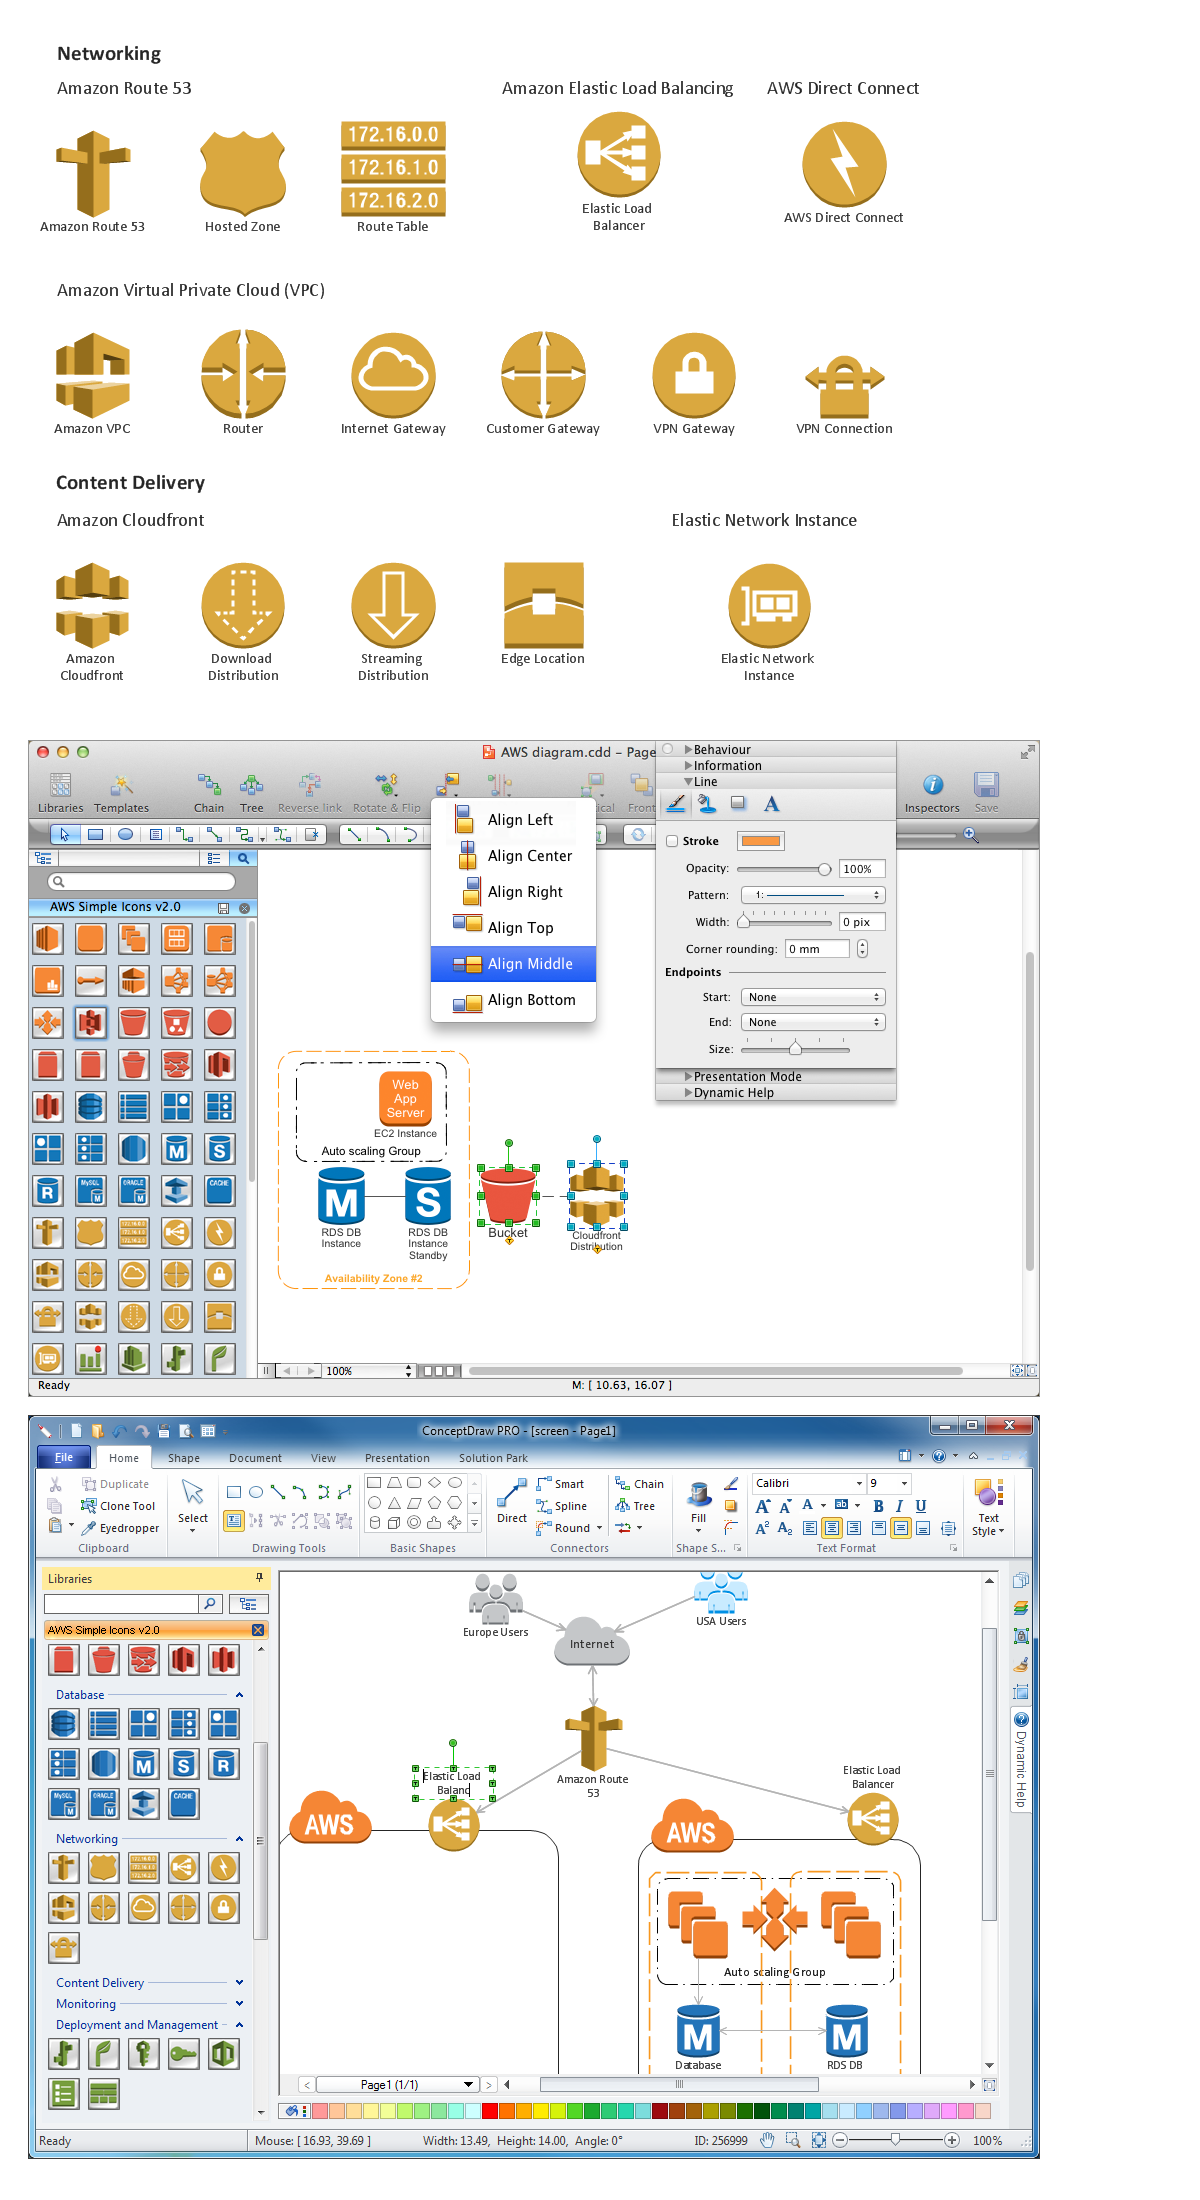 Amazon-Web-Services-AWS-Design-Elements-icons-Networking-and-ContentDelivery using conceptdraw solution park web tool